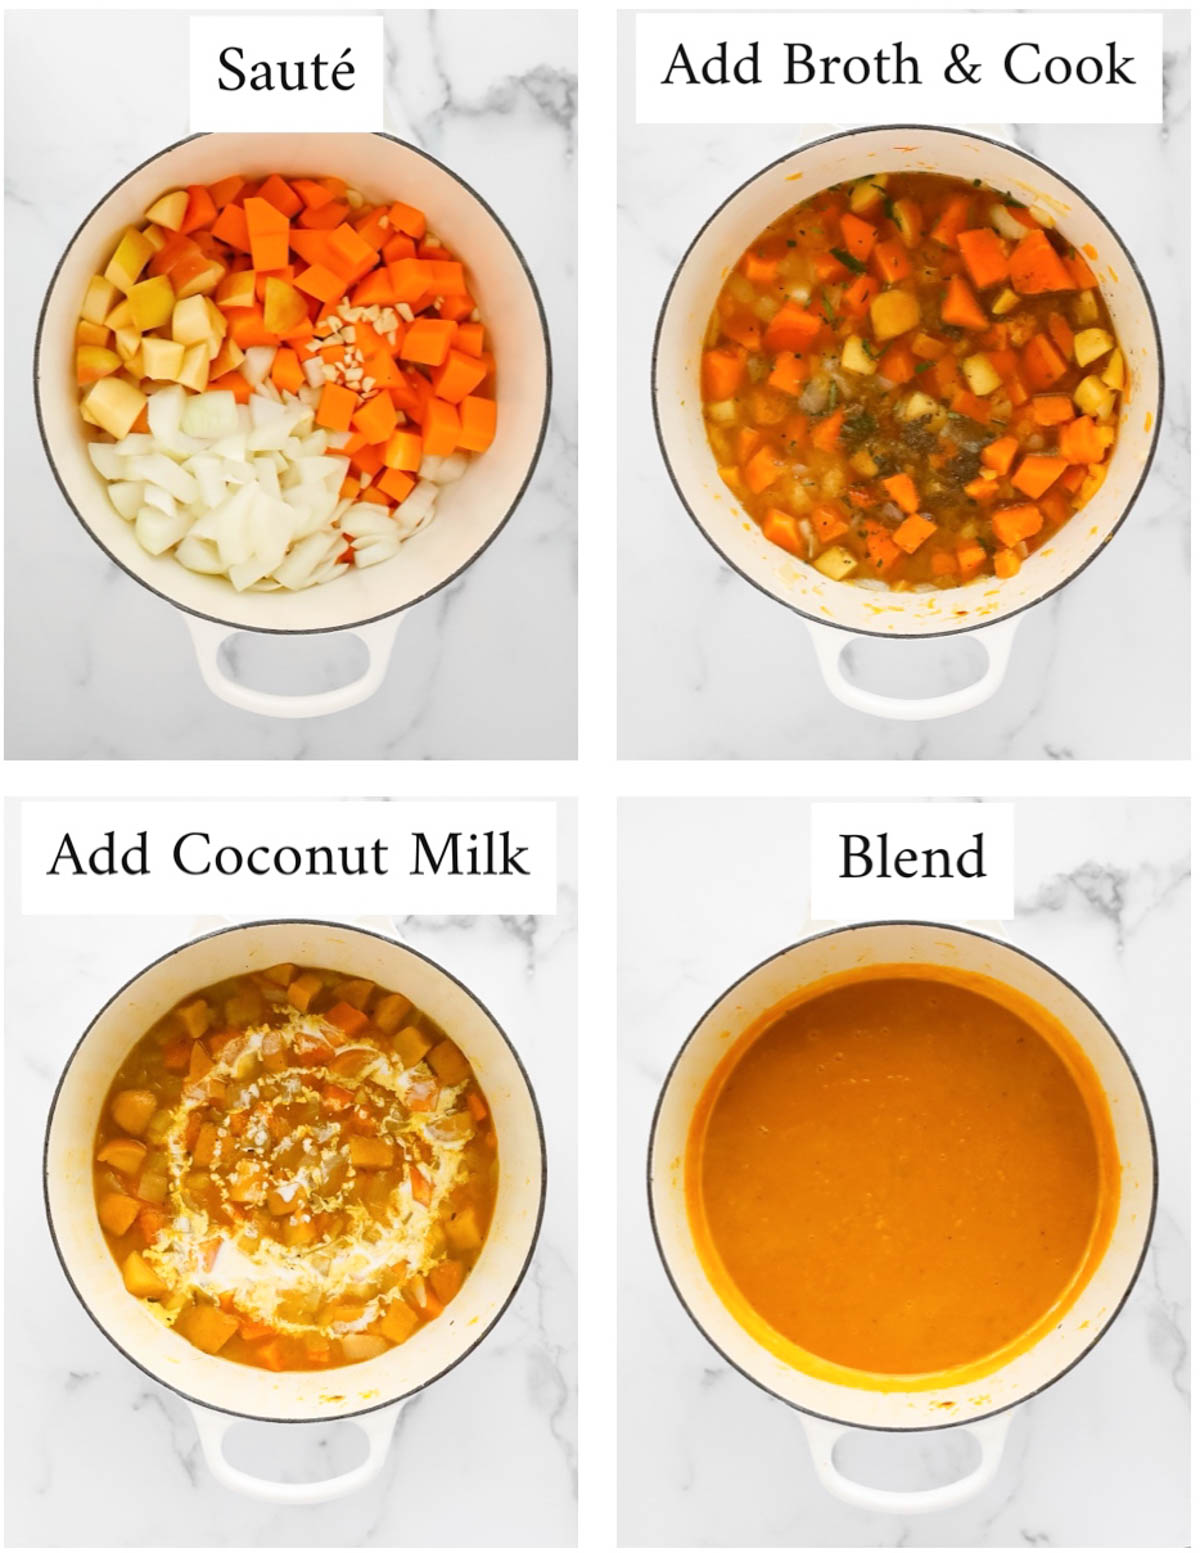 A collage of four labeled pictures: 1. "saute" a white pot filled with chopped vegetables. 2. "add broth and cook" a white pot filled with cooked vegetables and broth. 3. "add coconut milk" the cooked soup with a drizzle of coconut milk on top. 4. "blend" the soup is now blended and creamy.